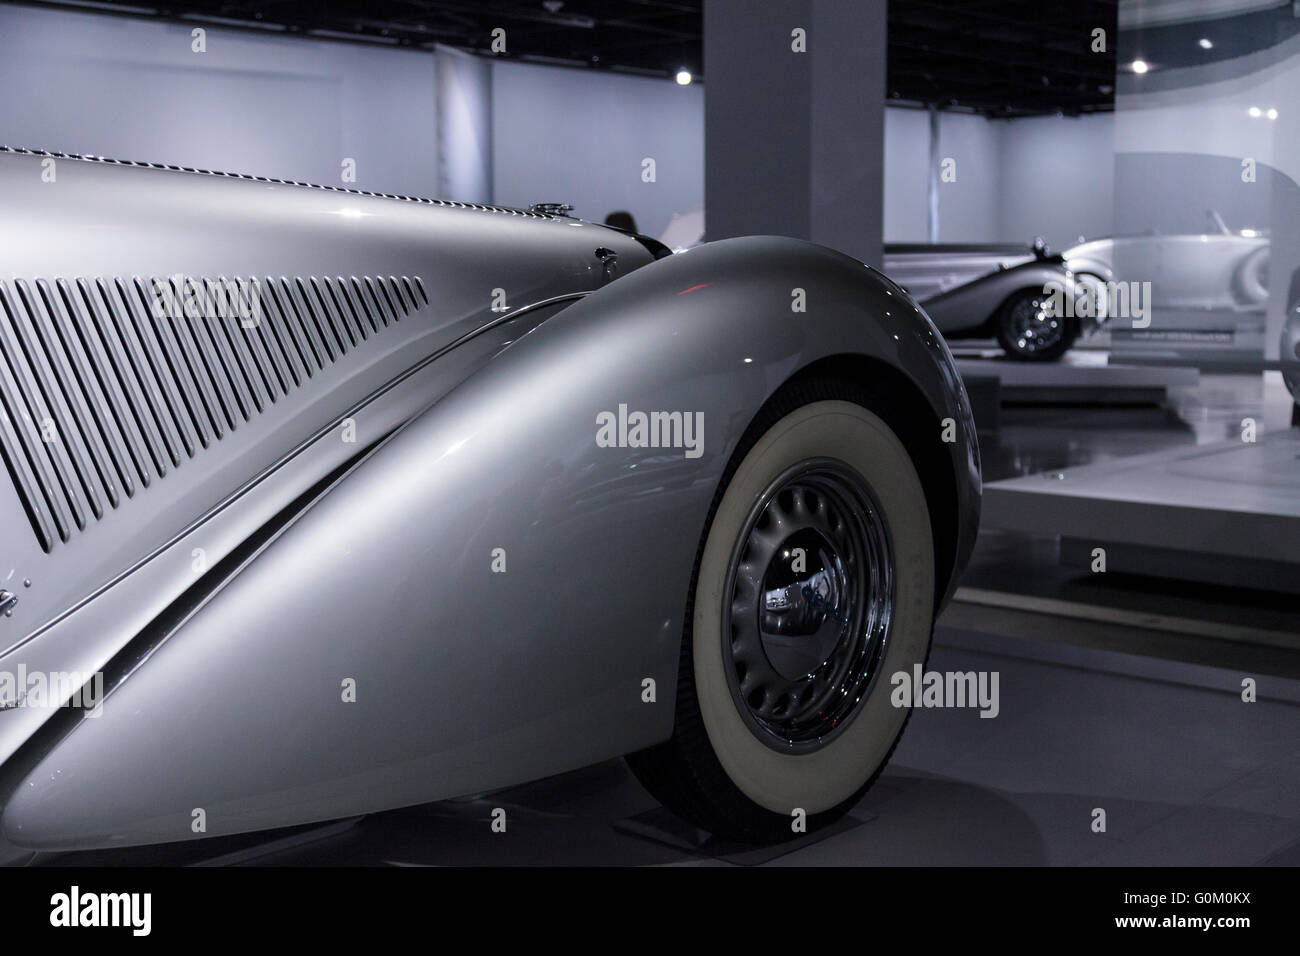 1937 Delage D8 120 S by Pourtout from the collection of Sam and Emily Mann at the Petersen Automotive Museum in Los Angeles Stock Photo